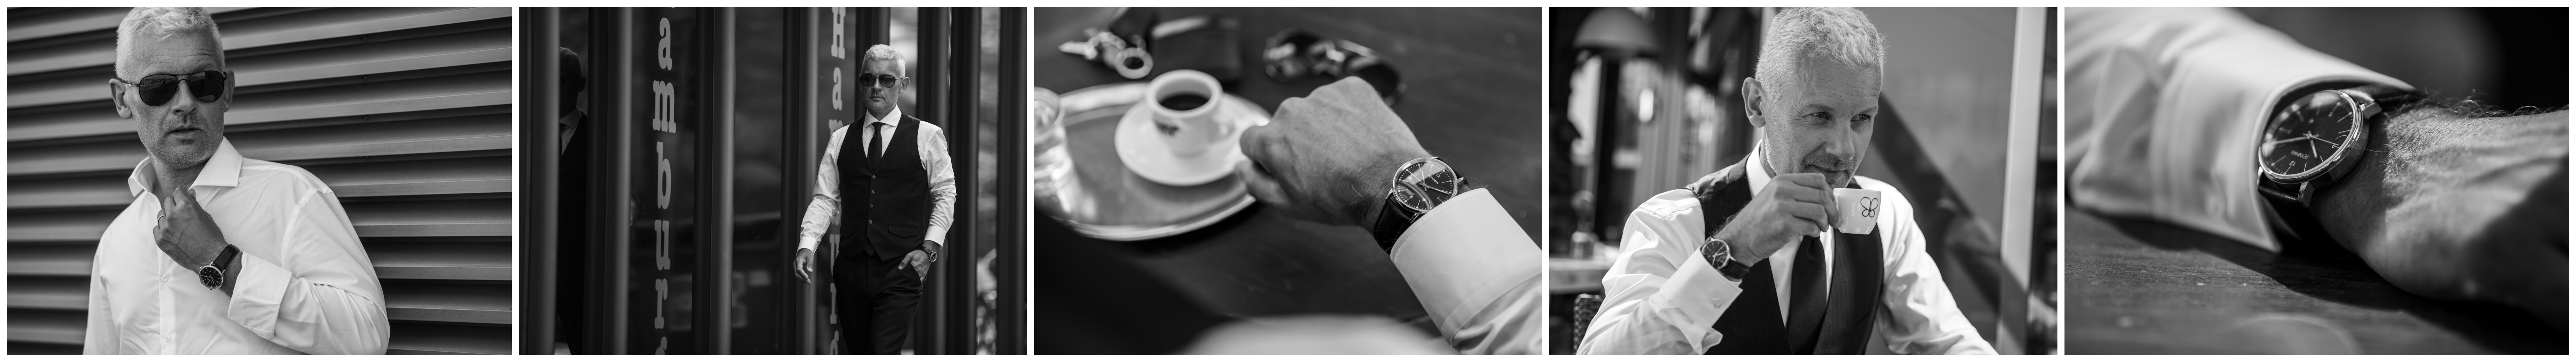 Fotoserie im Business Outfit mit Feynman CWII Uhr